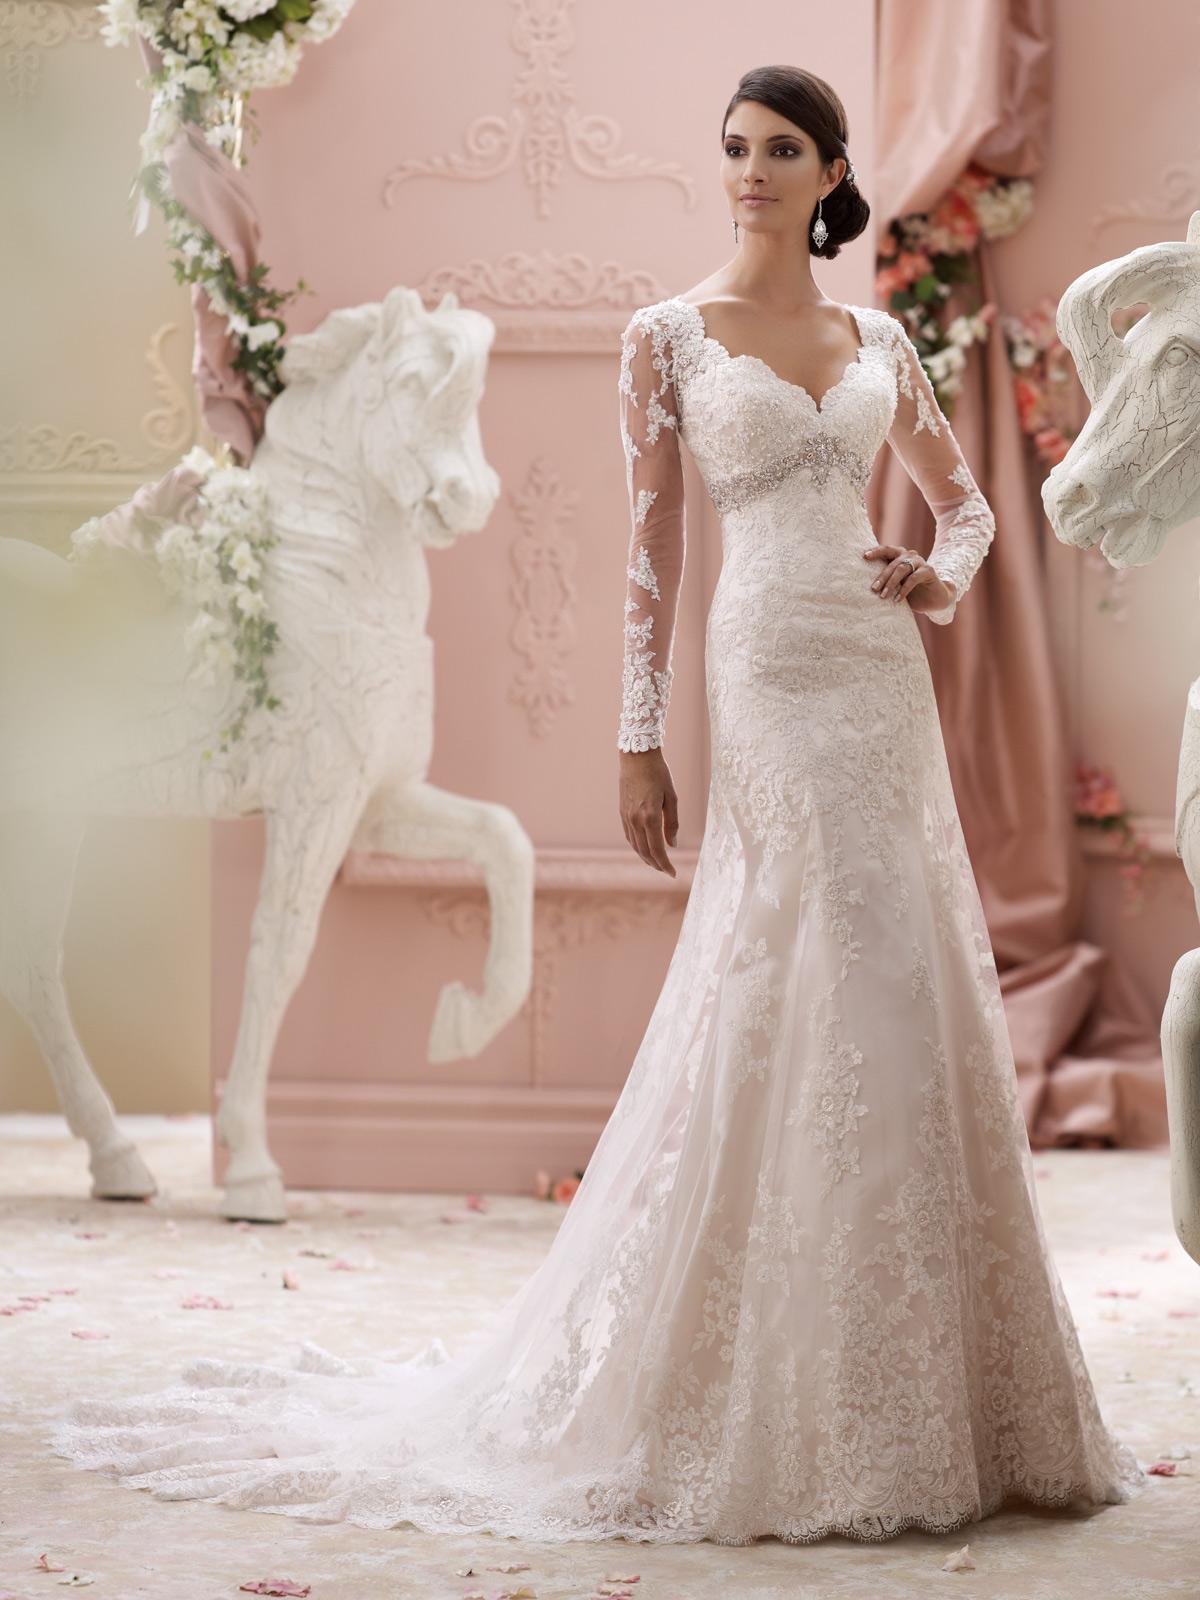 Poise Passion: Wedding Dress Styles for Brides and Others